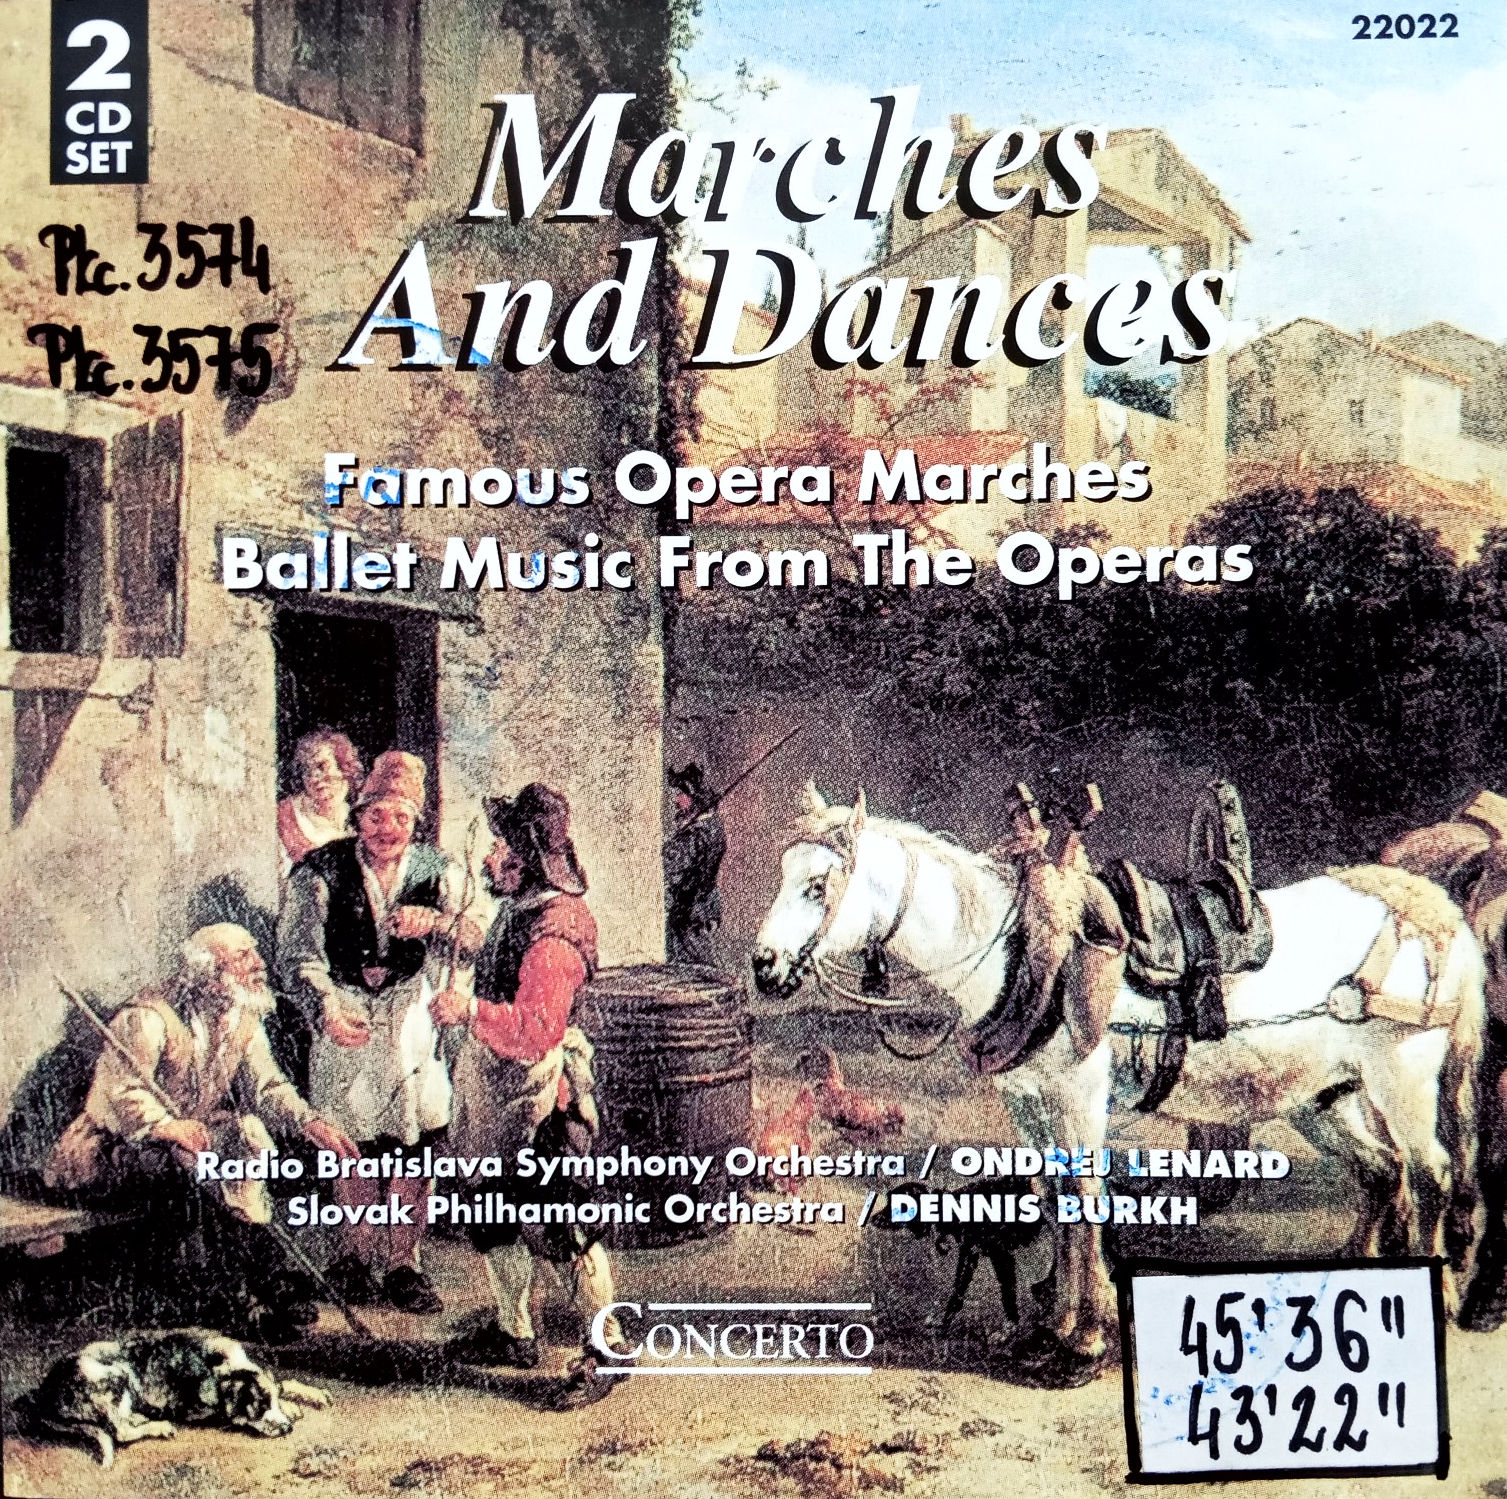 Marches And Dances – Famous Opera Marches Ballet Music From The Operas